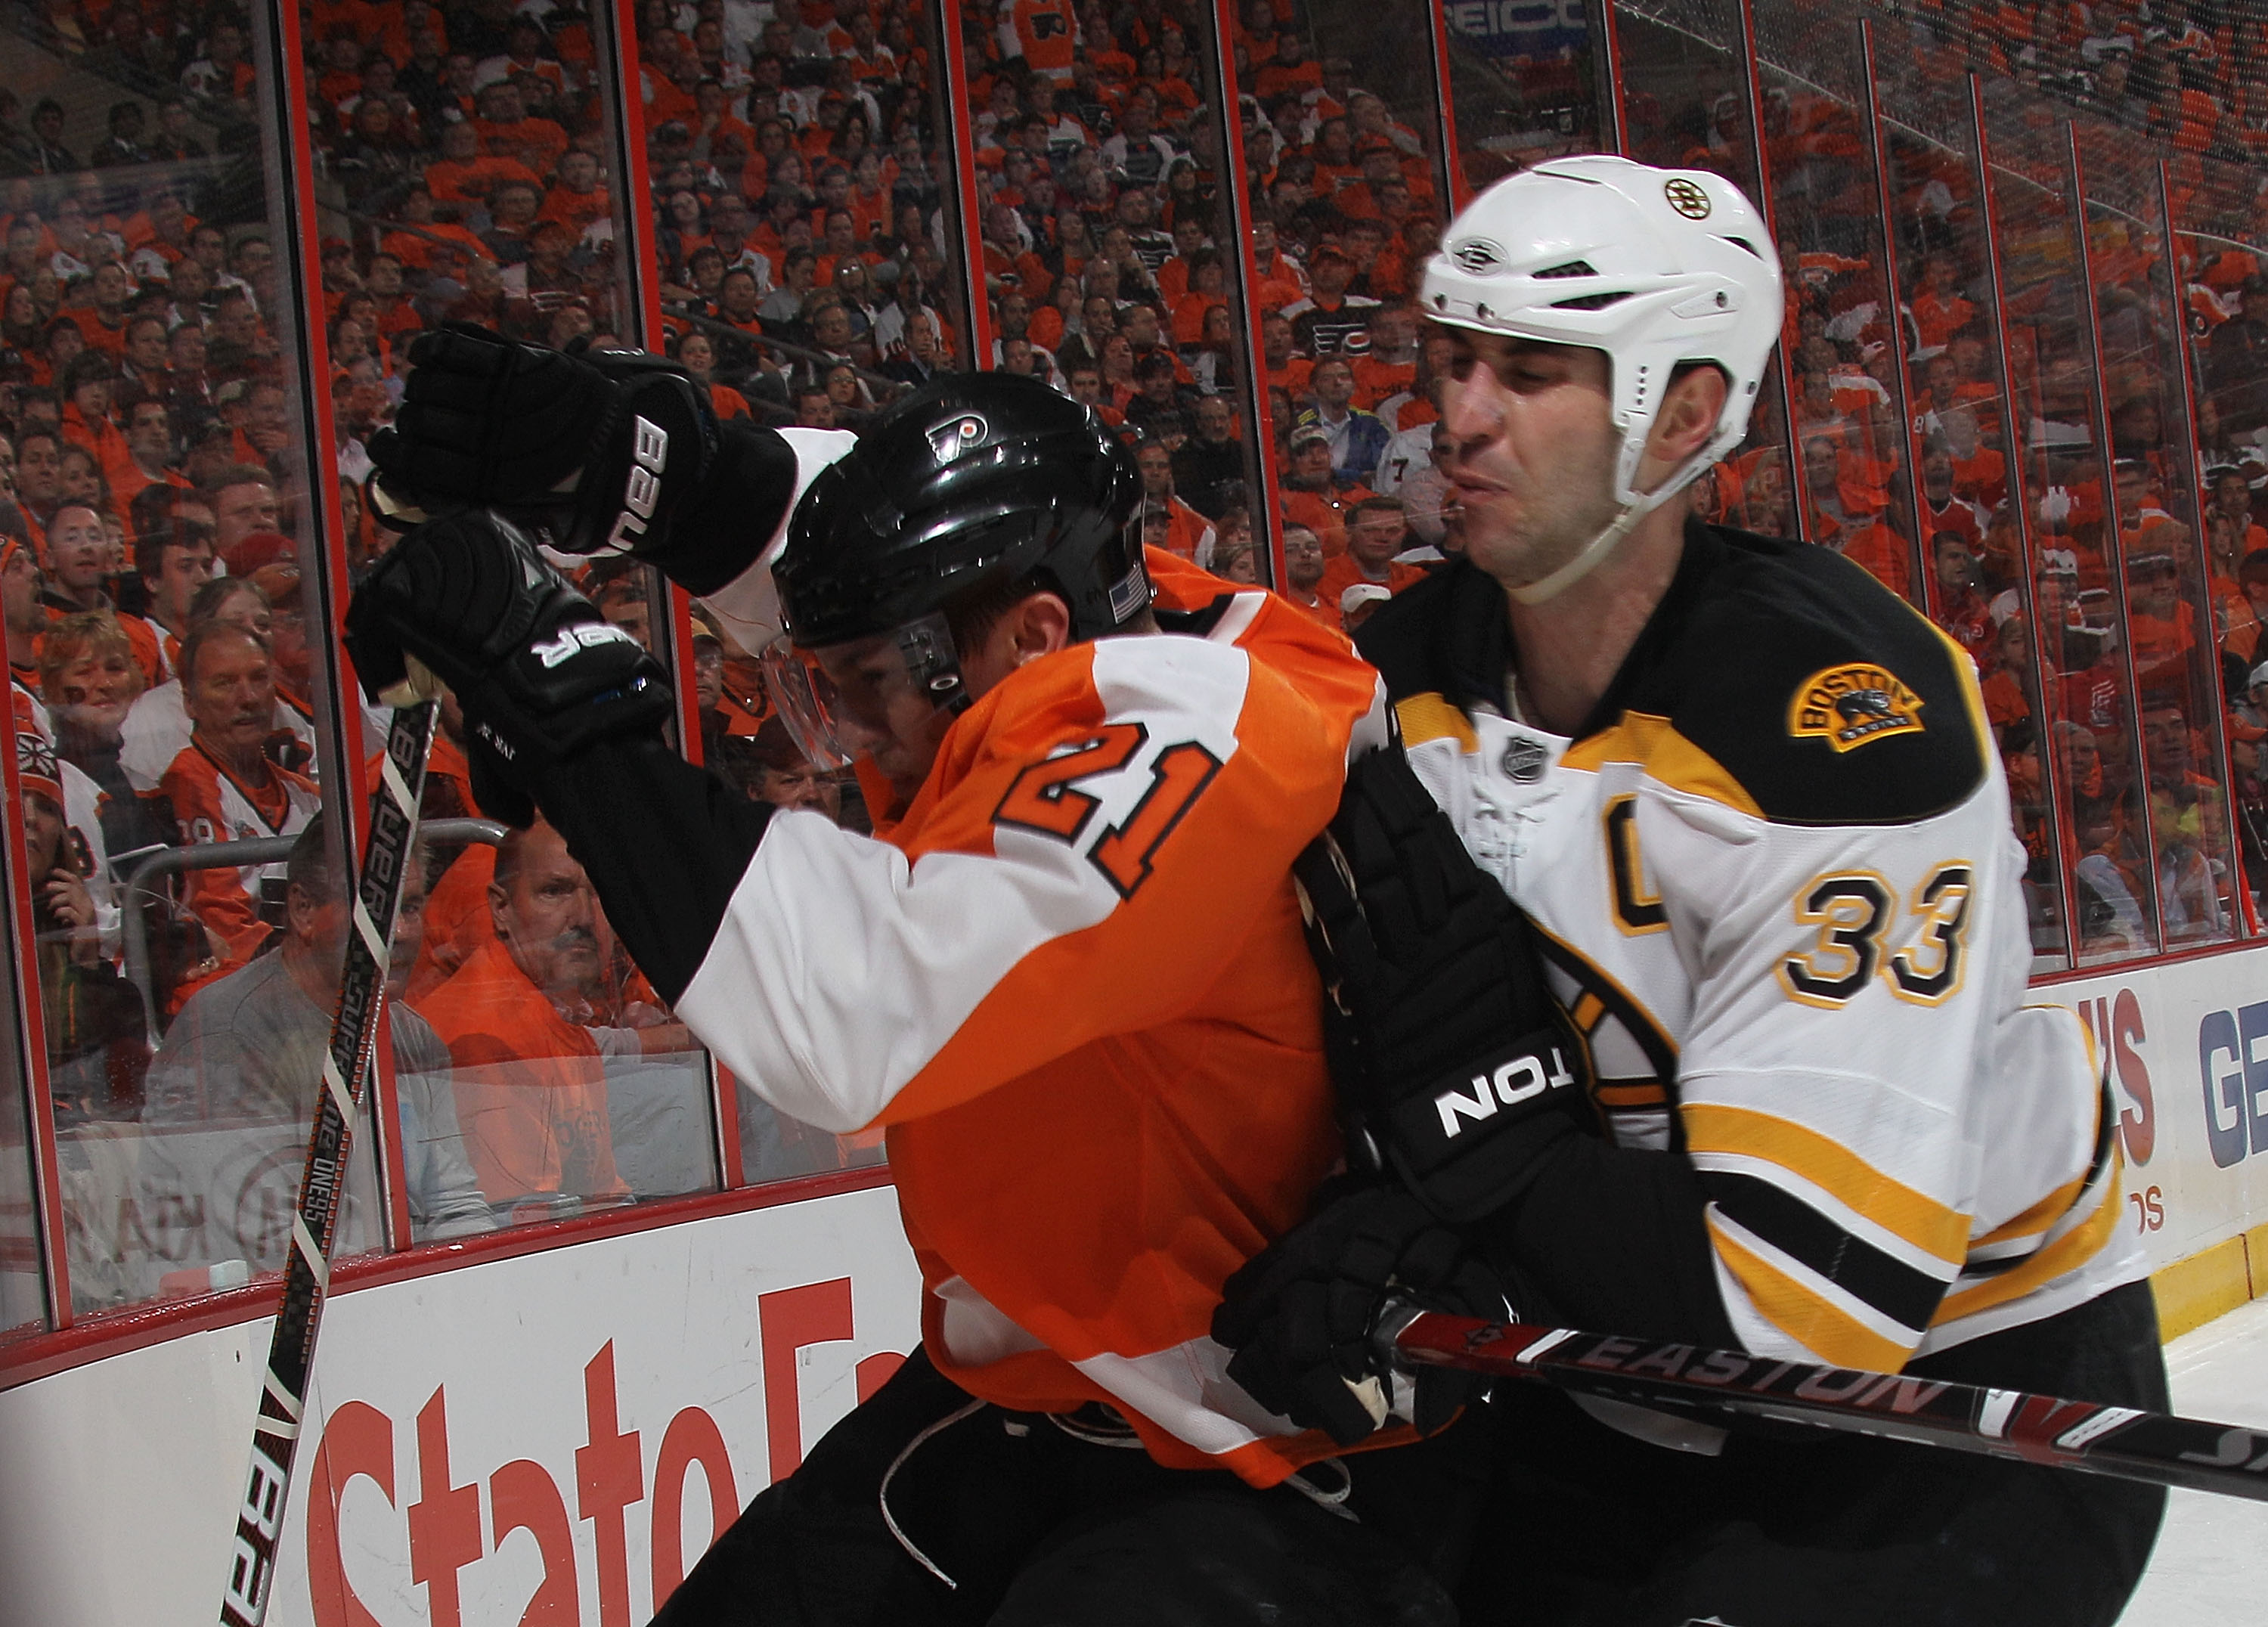 PHILADELPHIA - MAY 12:  Zdeno Chara #33 of the Boston Bruins rides James van Riemsdyk #21 of the Philadelphia Flyers into the boards in Game Six of the Eastern Conference Semifinals during the 2010 NHL Stanley Cup Finals at the Wachovia Center on May 12, 